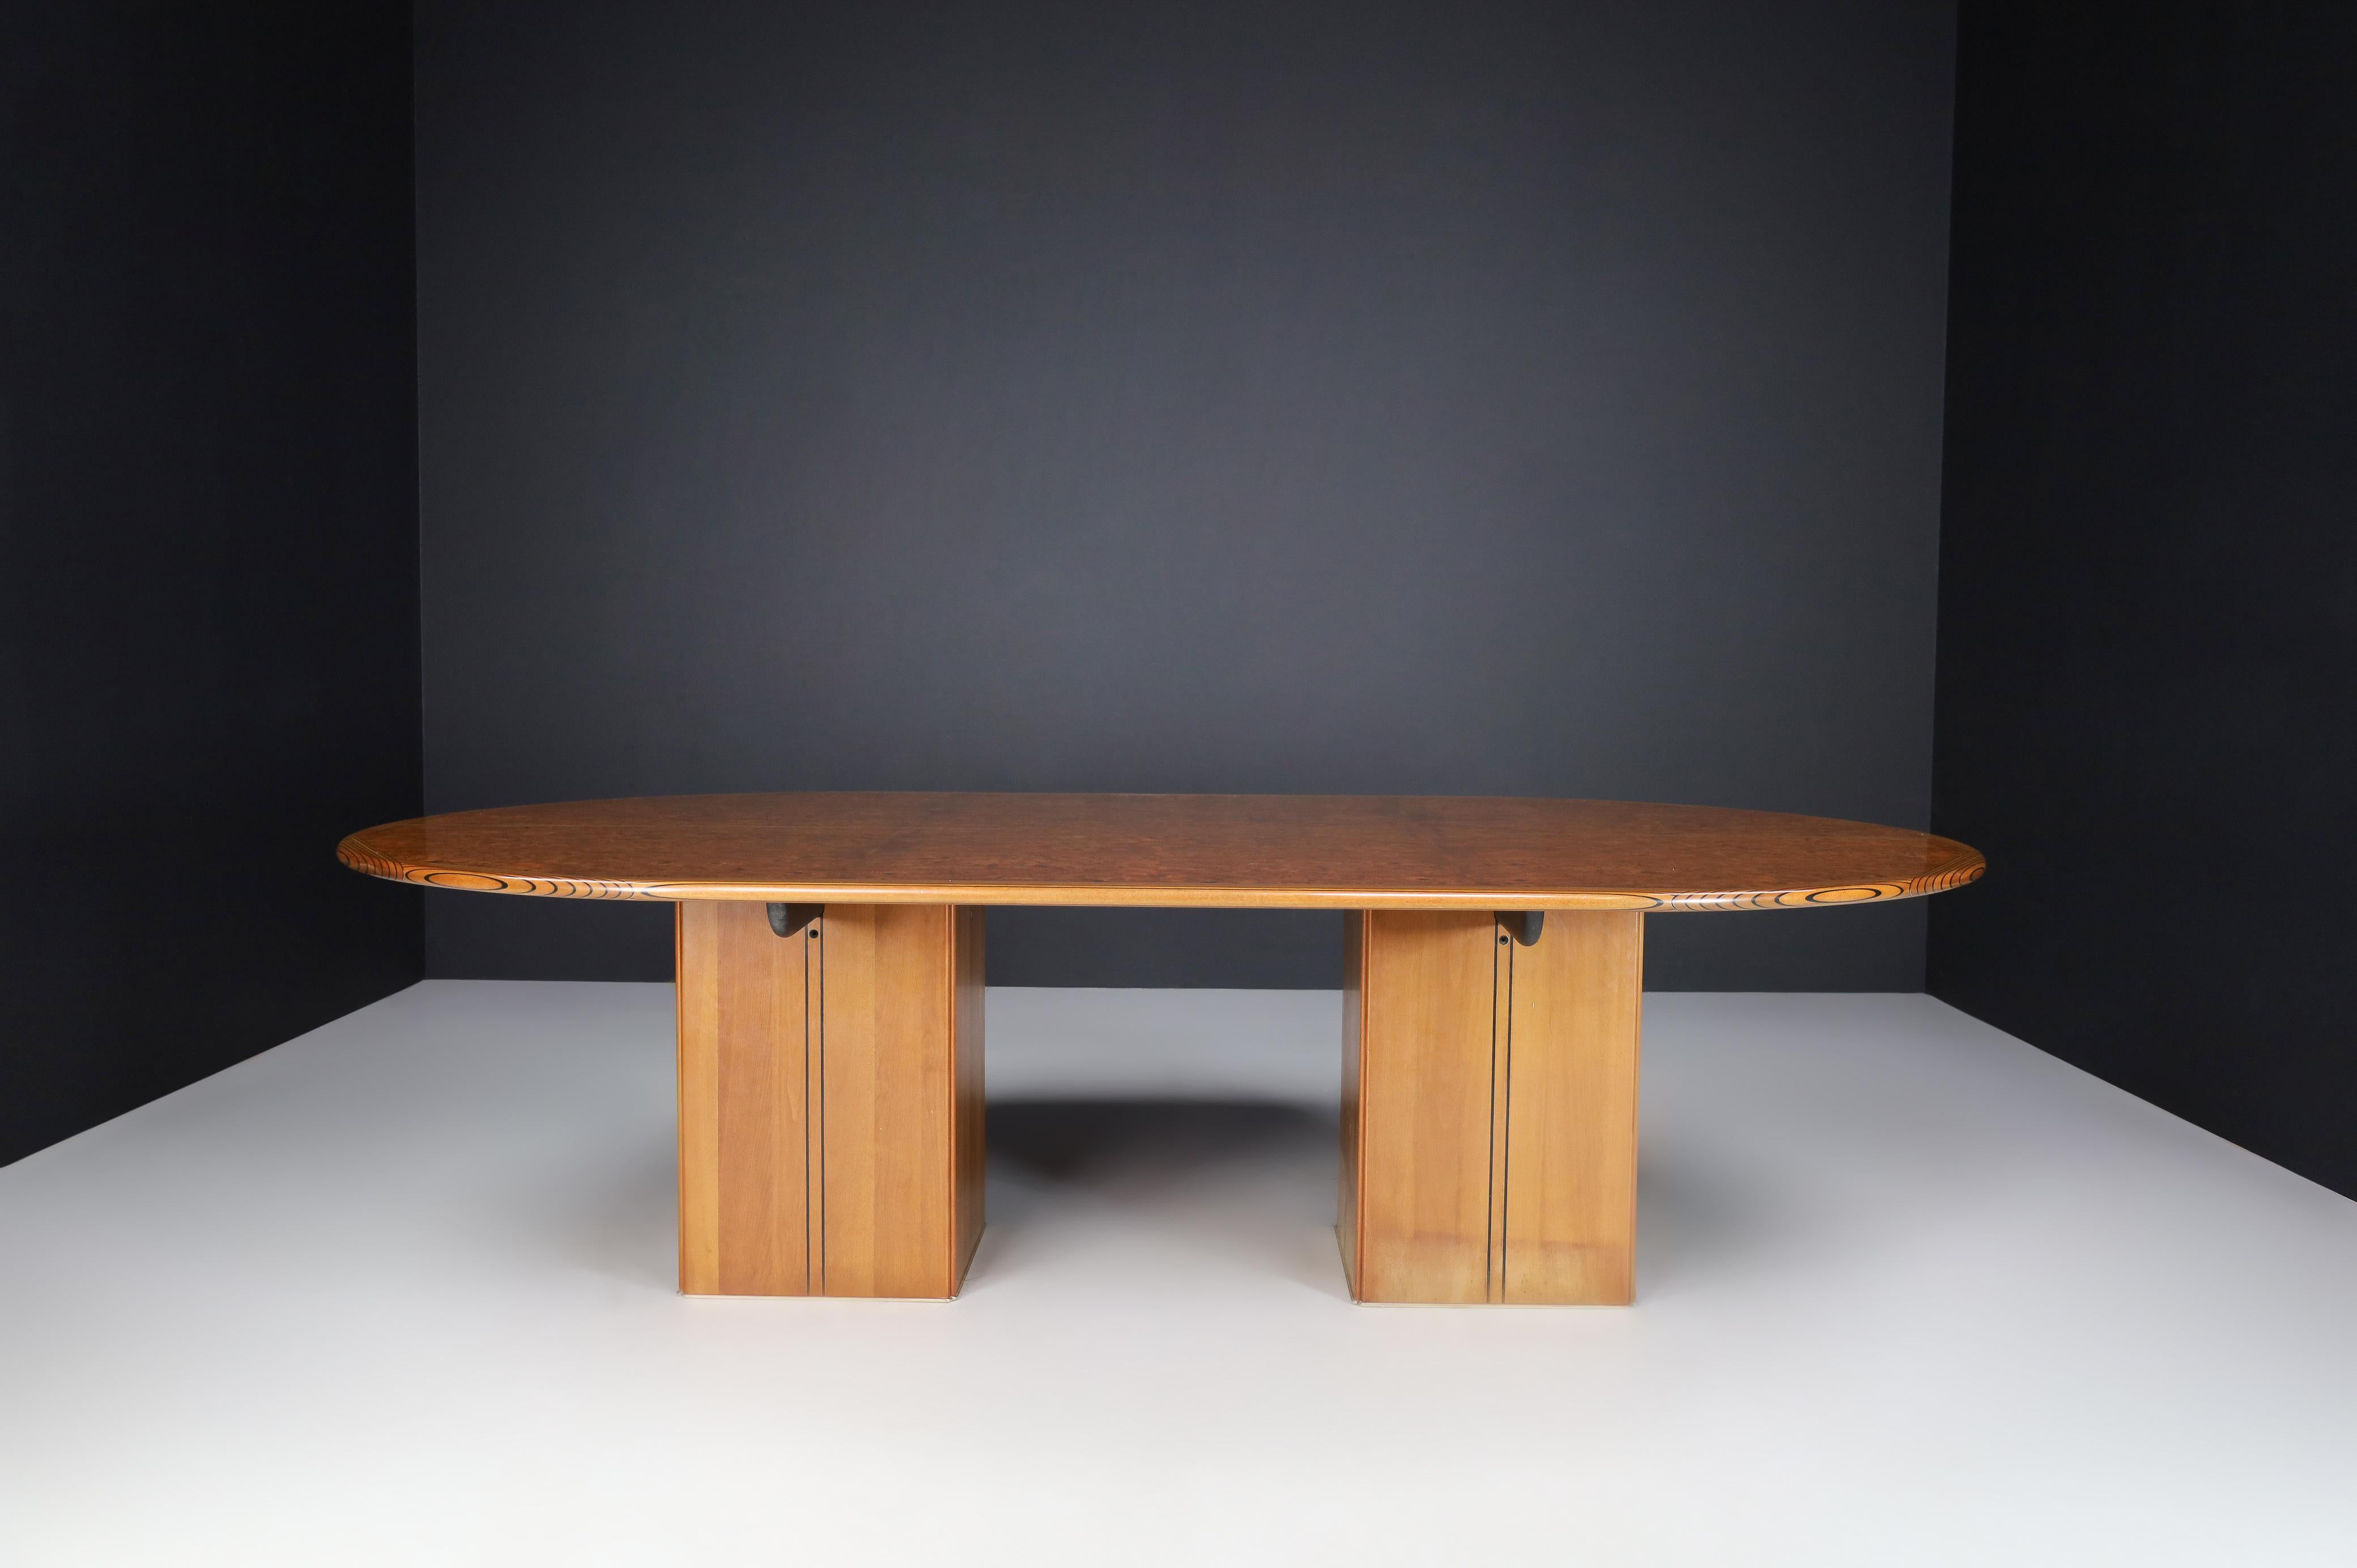 Large Tobia Scarpa Africa dining / conference table by Maxalto, Italy, 1970

Large Africa series dining/conference table by Afra & Tobia Scarpa for Maxalto, Italy, circa 1970. The tabletop is made in two pieces which are divided over the length.